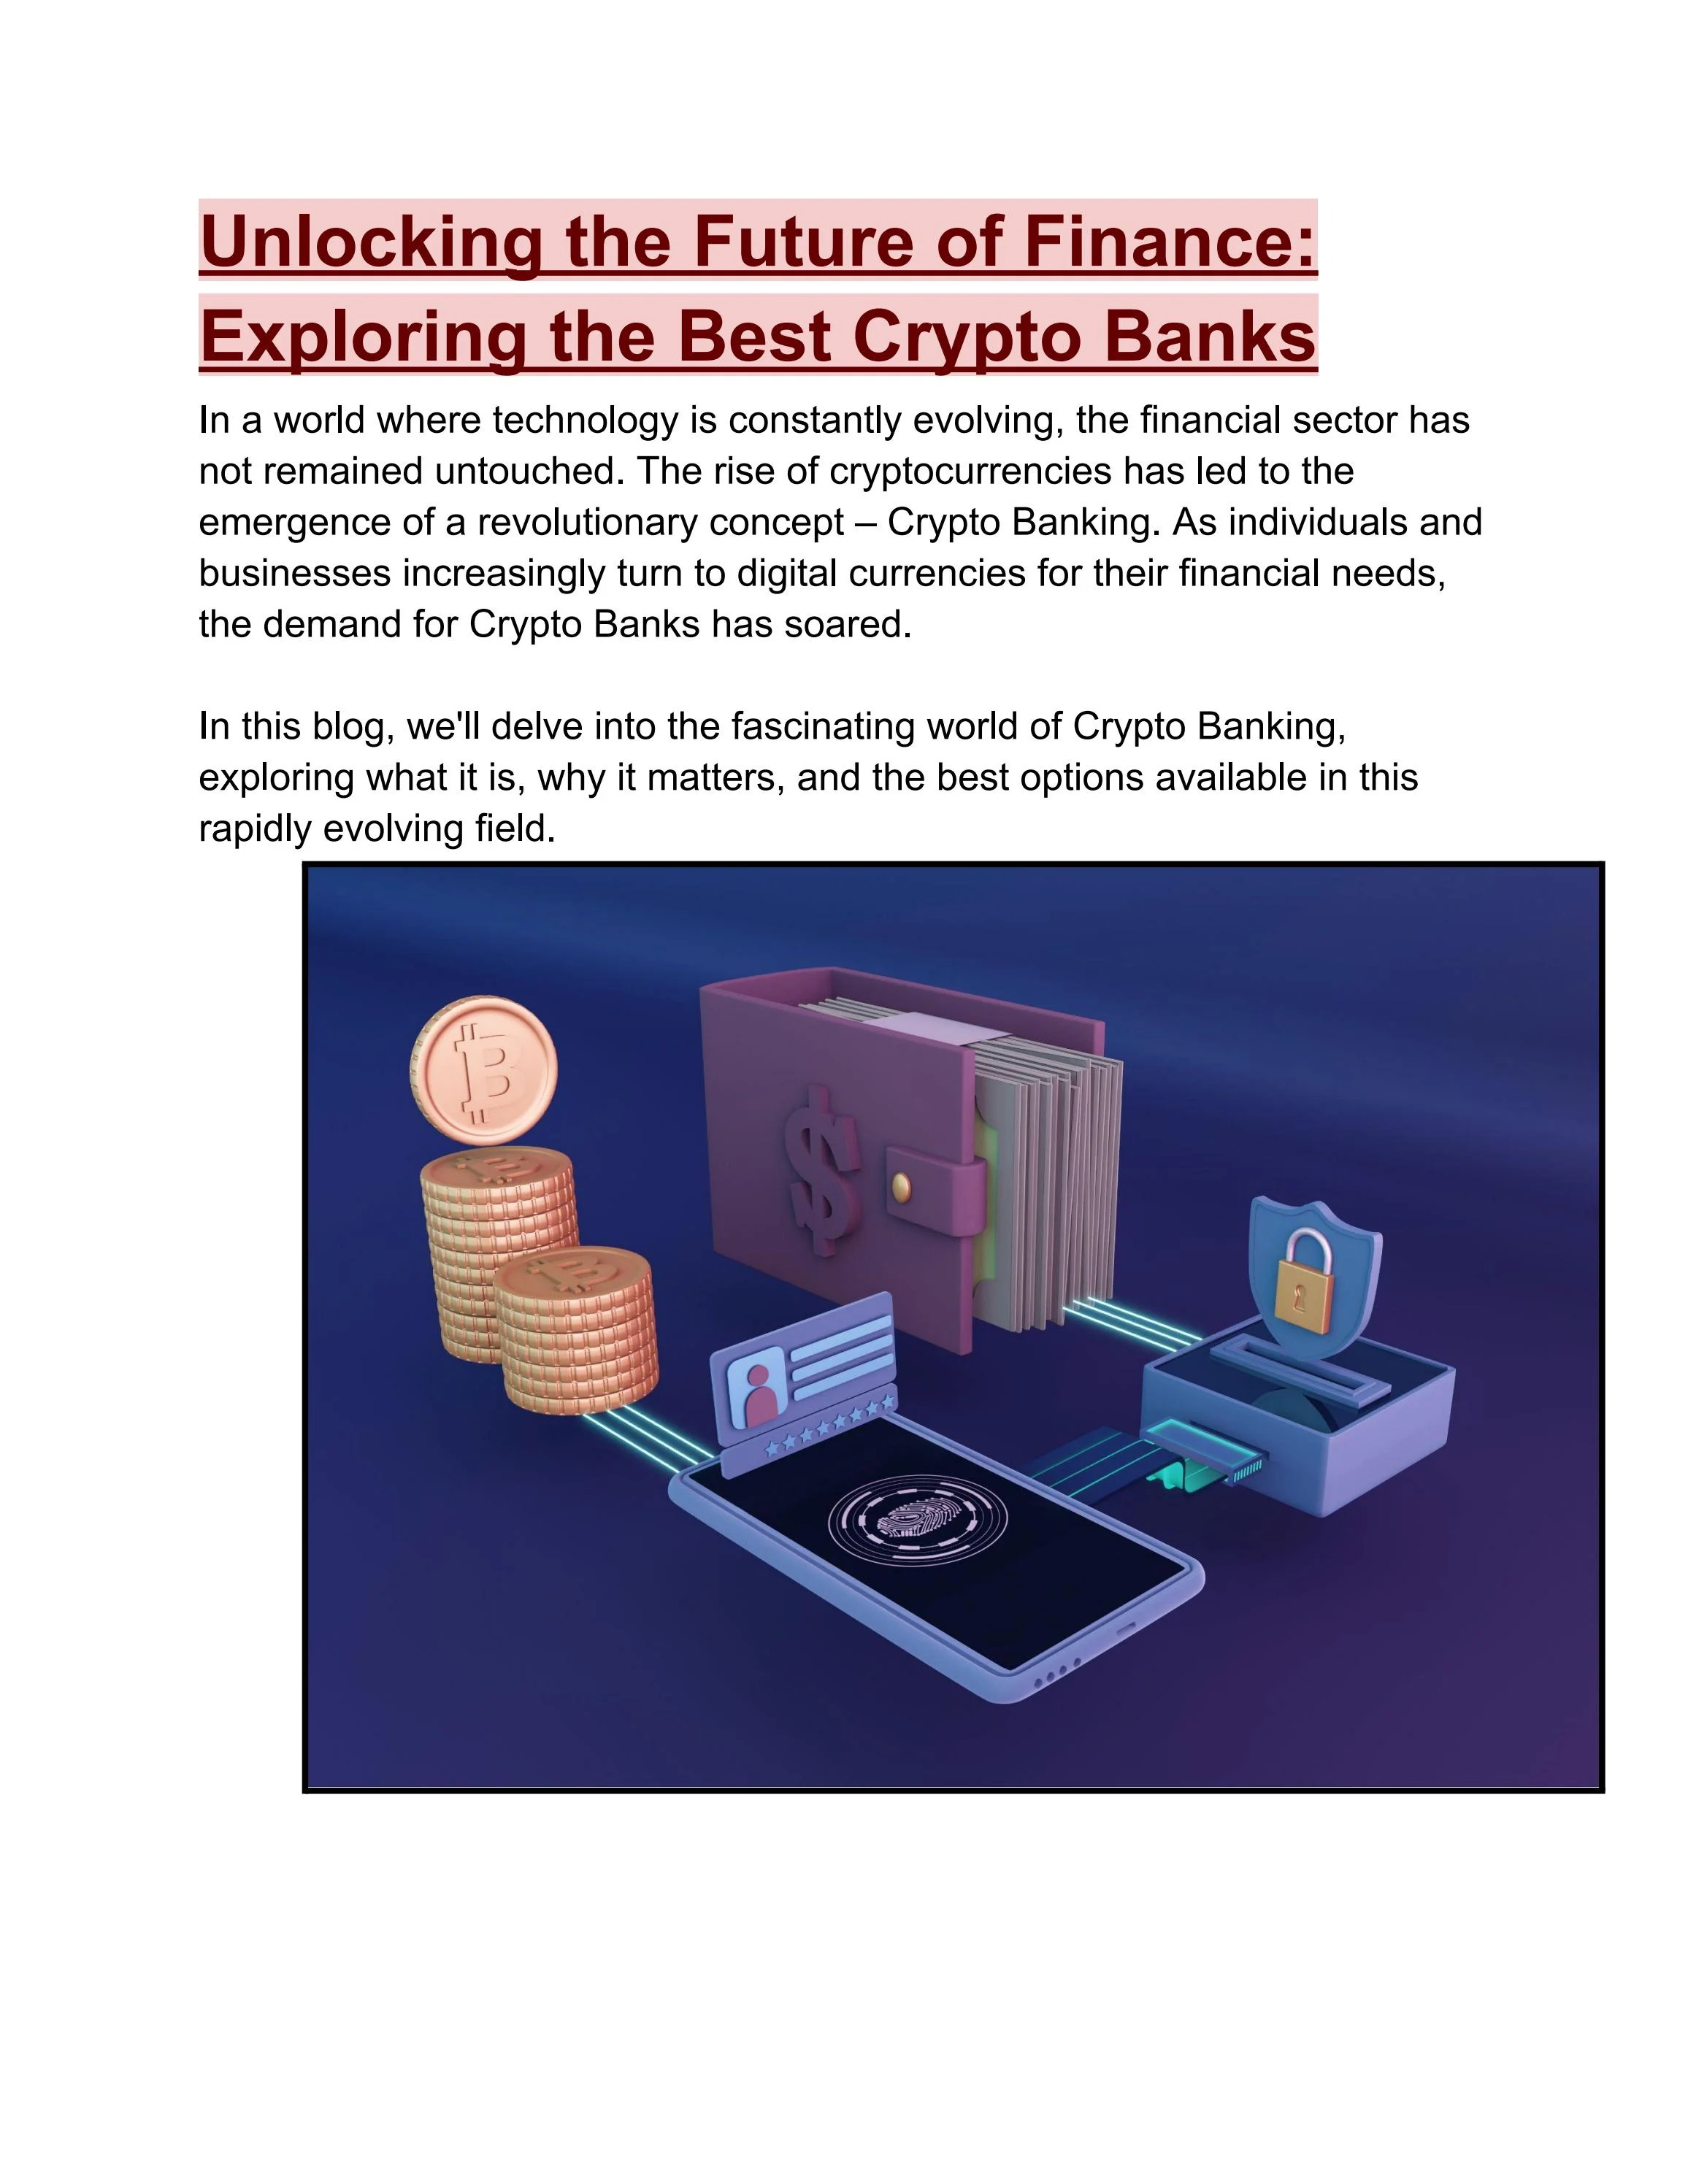 The Future of Crypto Banking